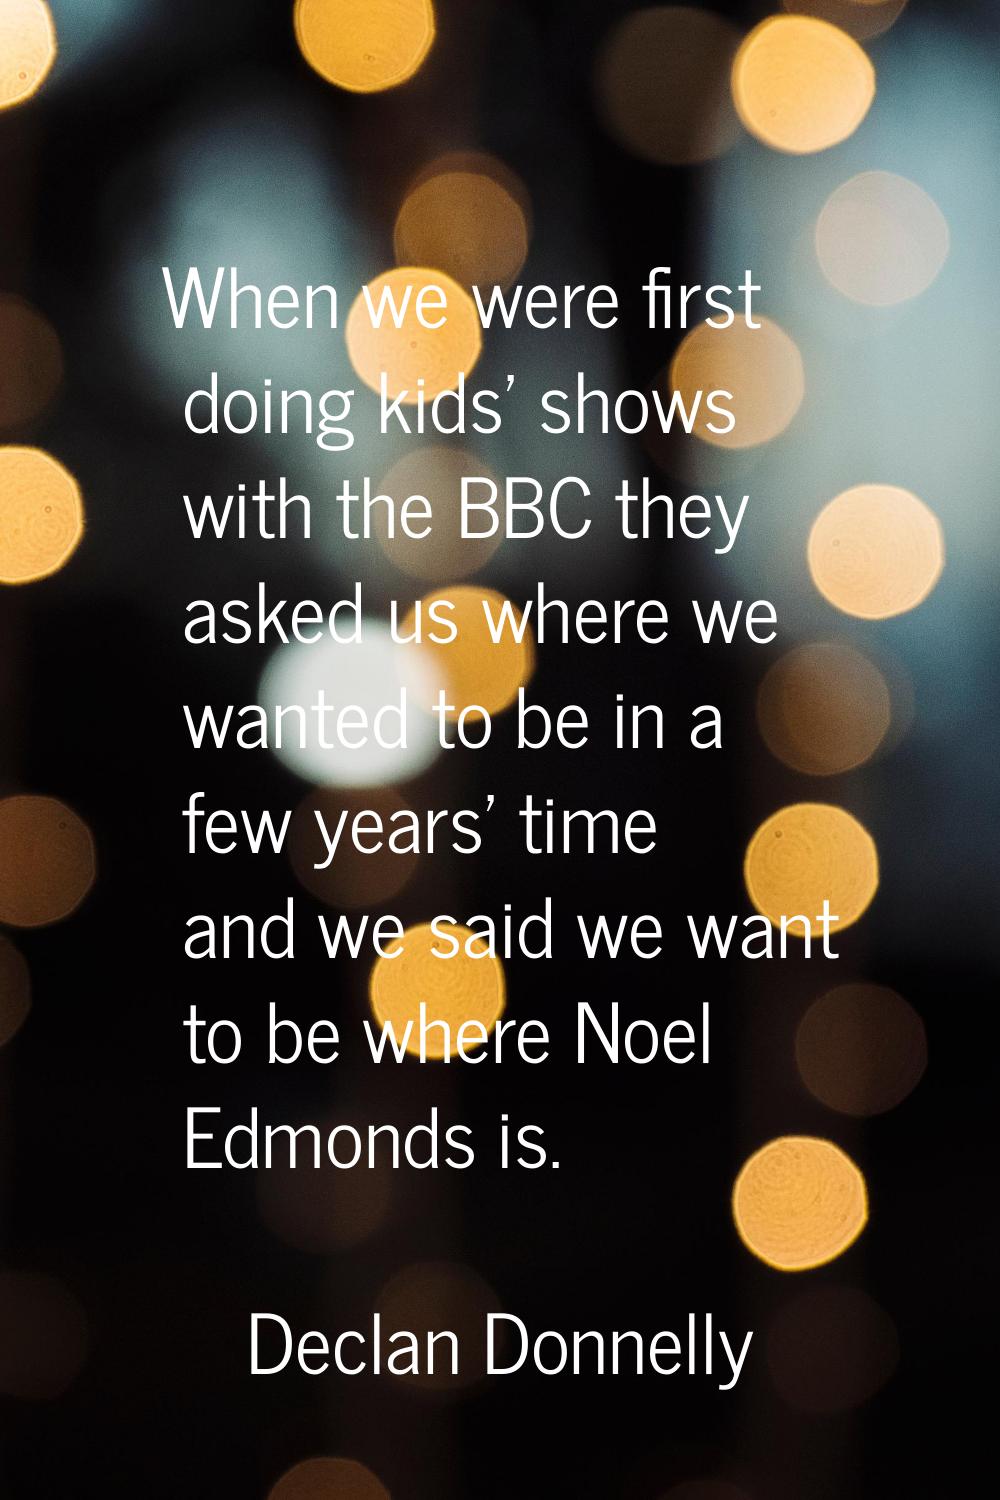 When we were first doing kids' shows with the BBC they asked us where we wanted to be in a few year